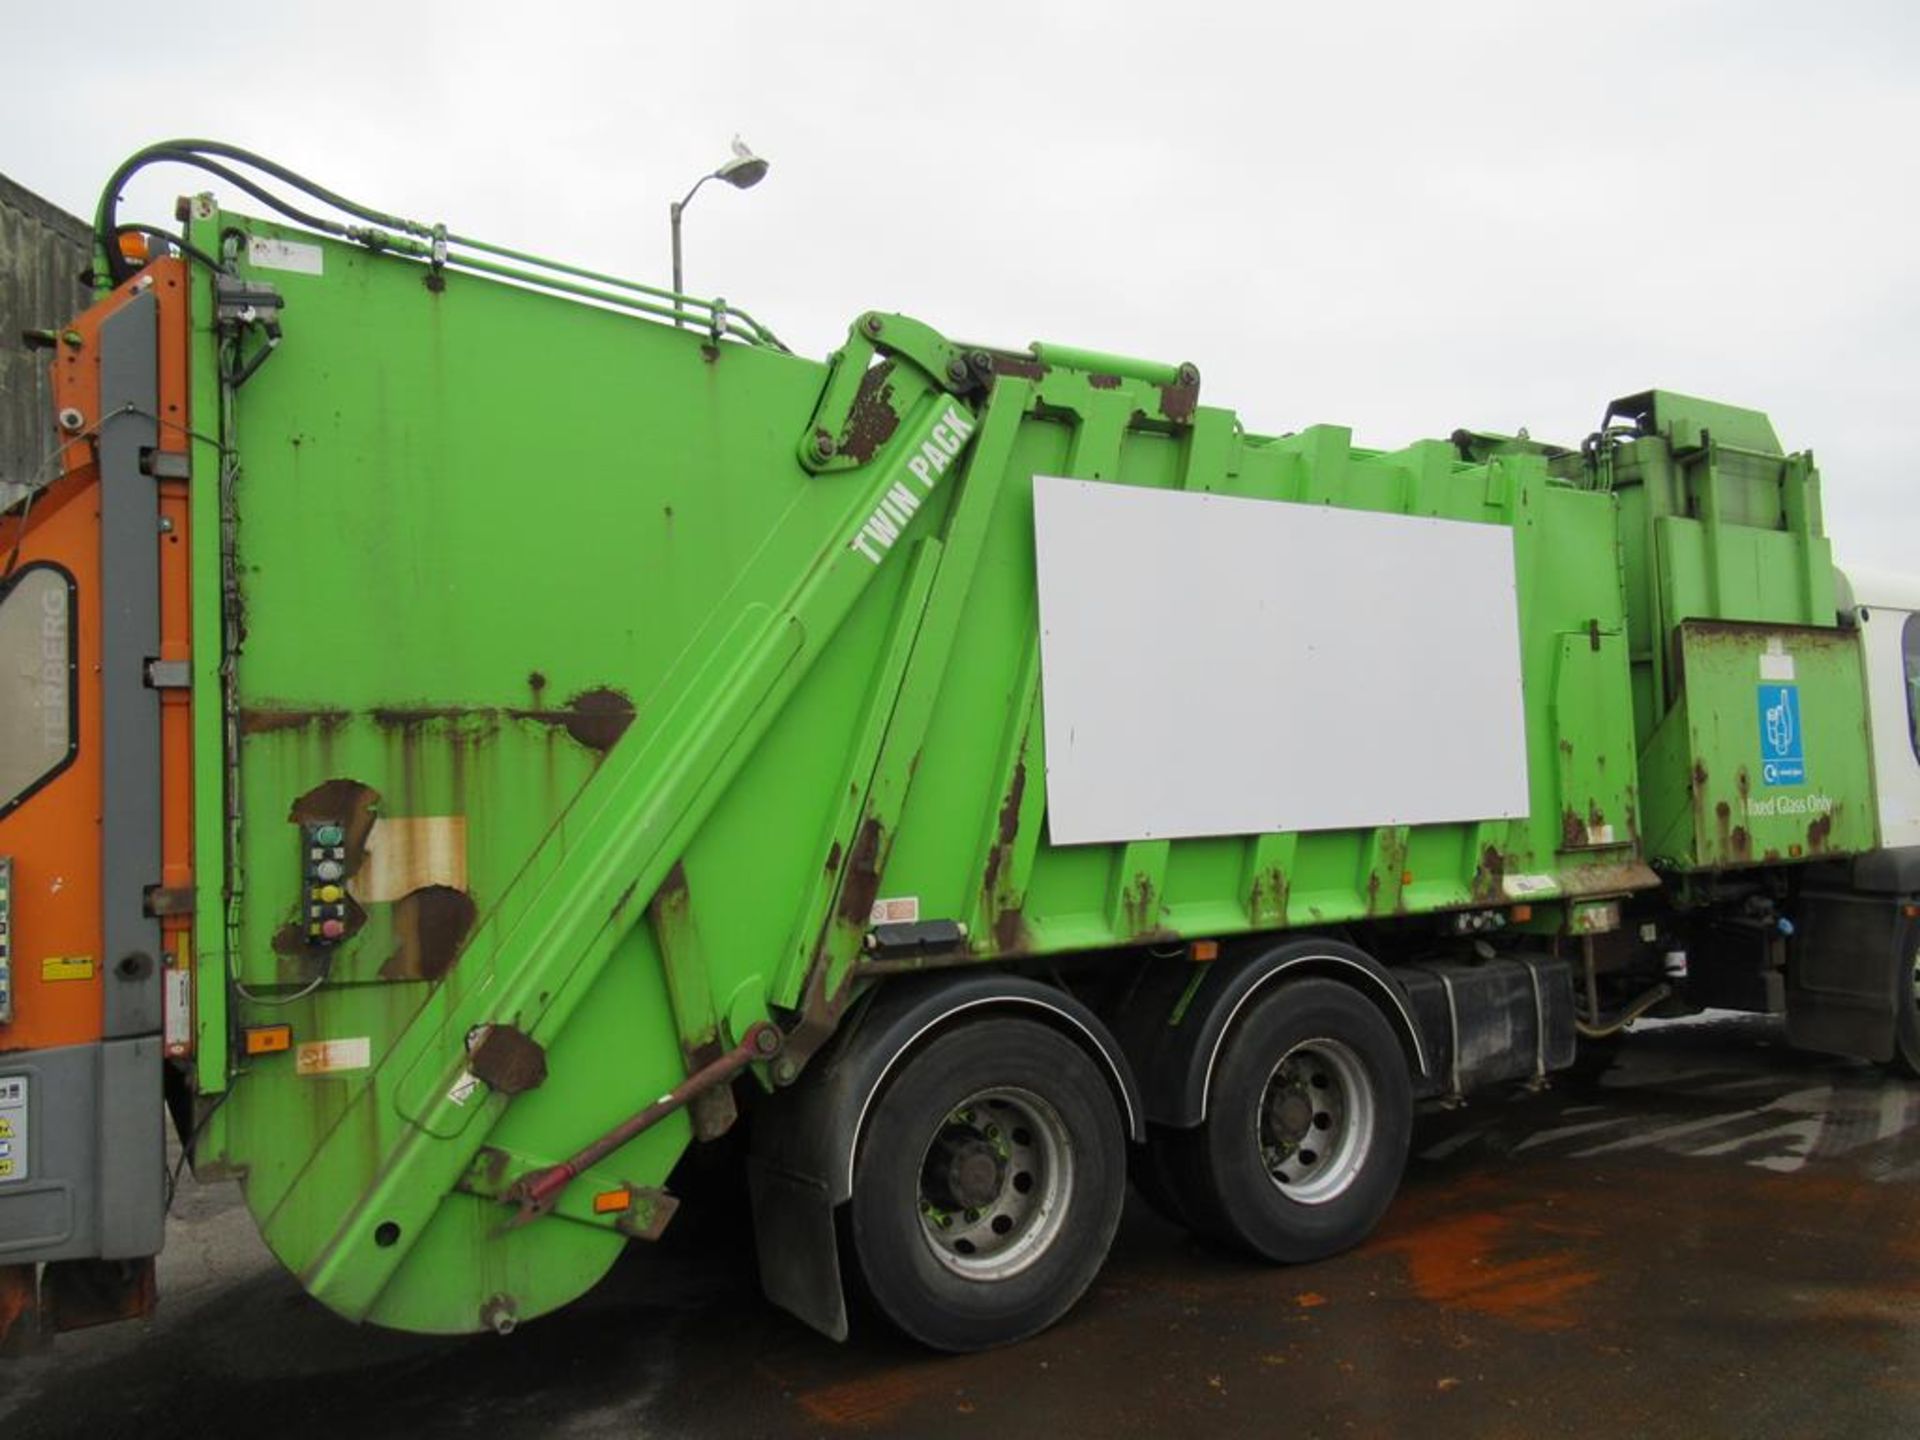 Dennis Eagle Elite 2 One Pass Refuse Collection Vehicle - Image 15 of 34